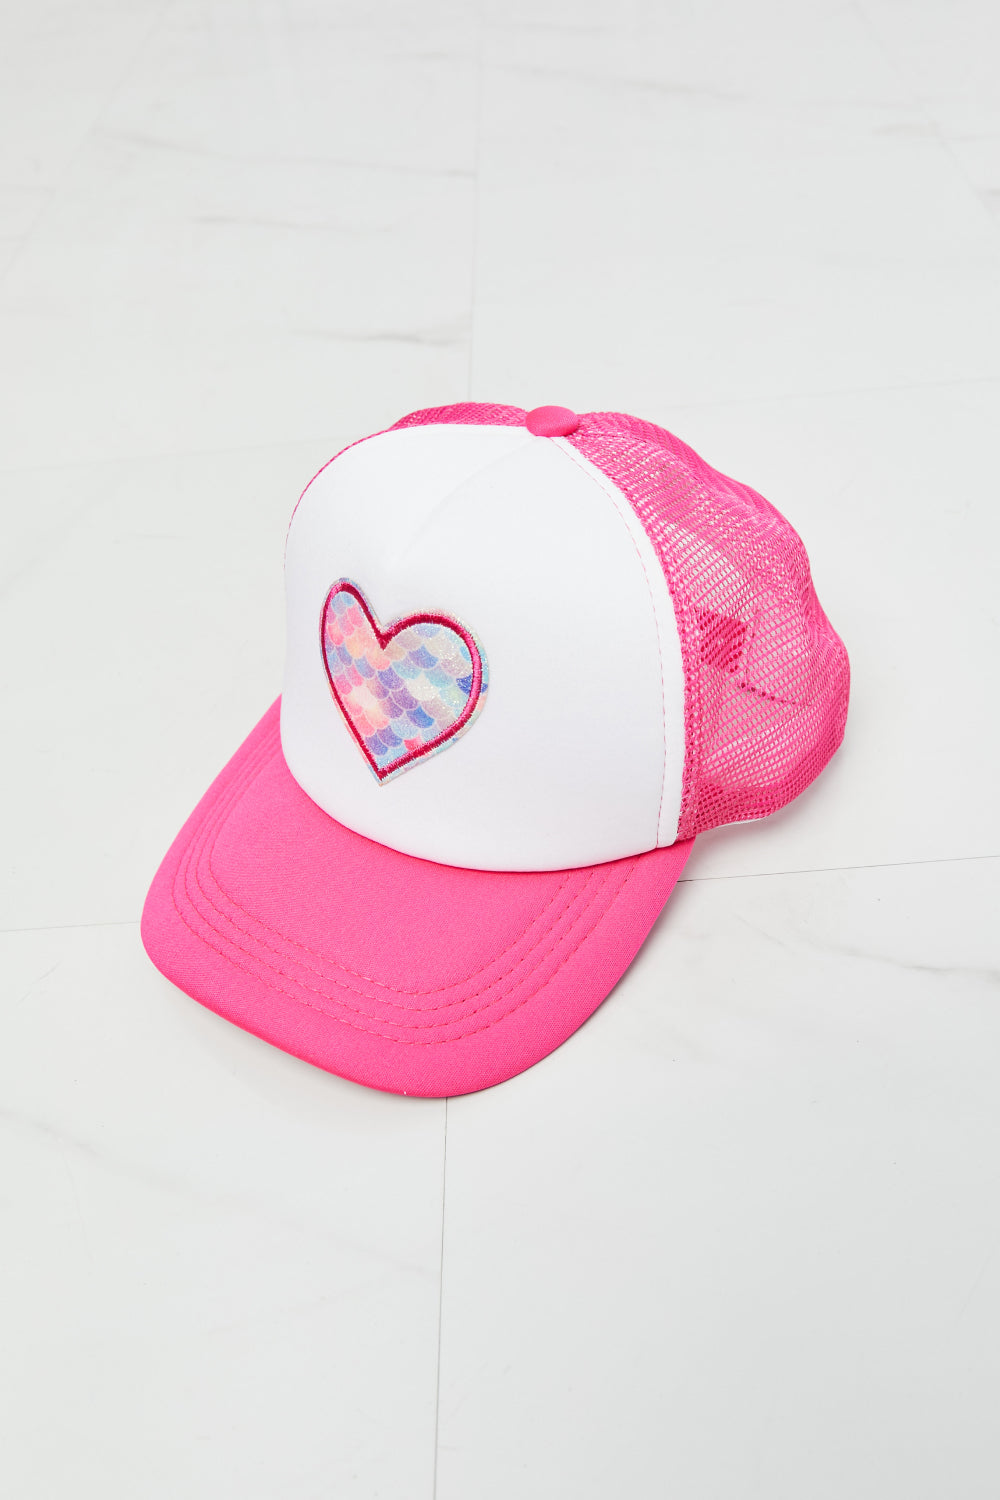 Fame Falling For You Trucker Hat in Pink - Hats - FITGGINS